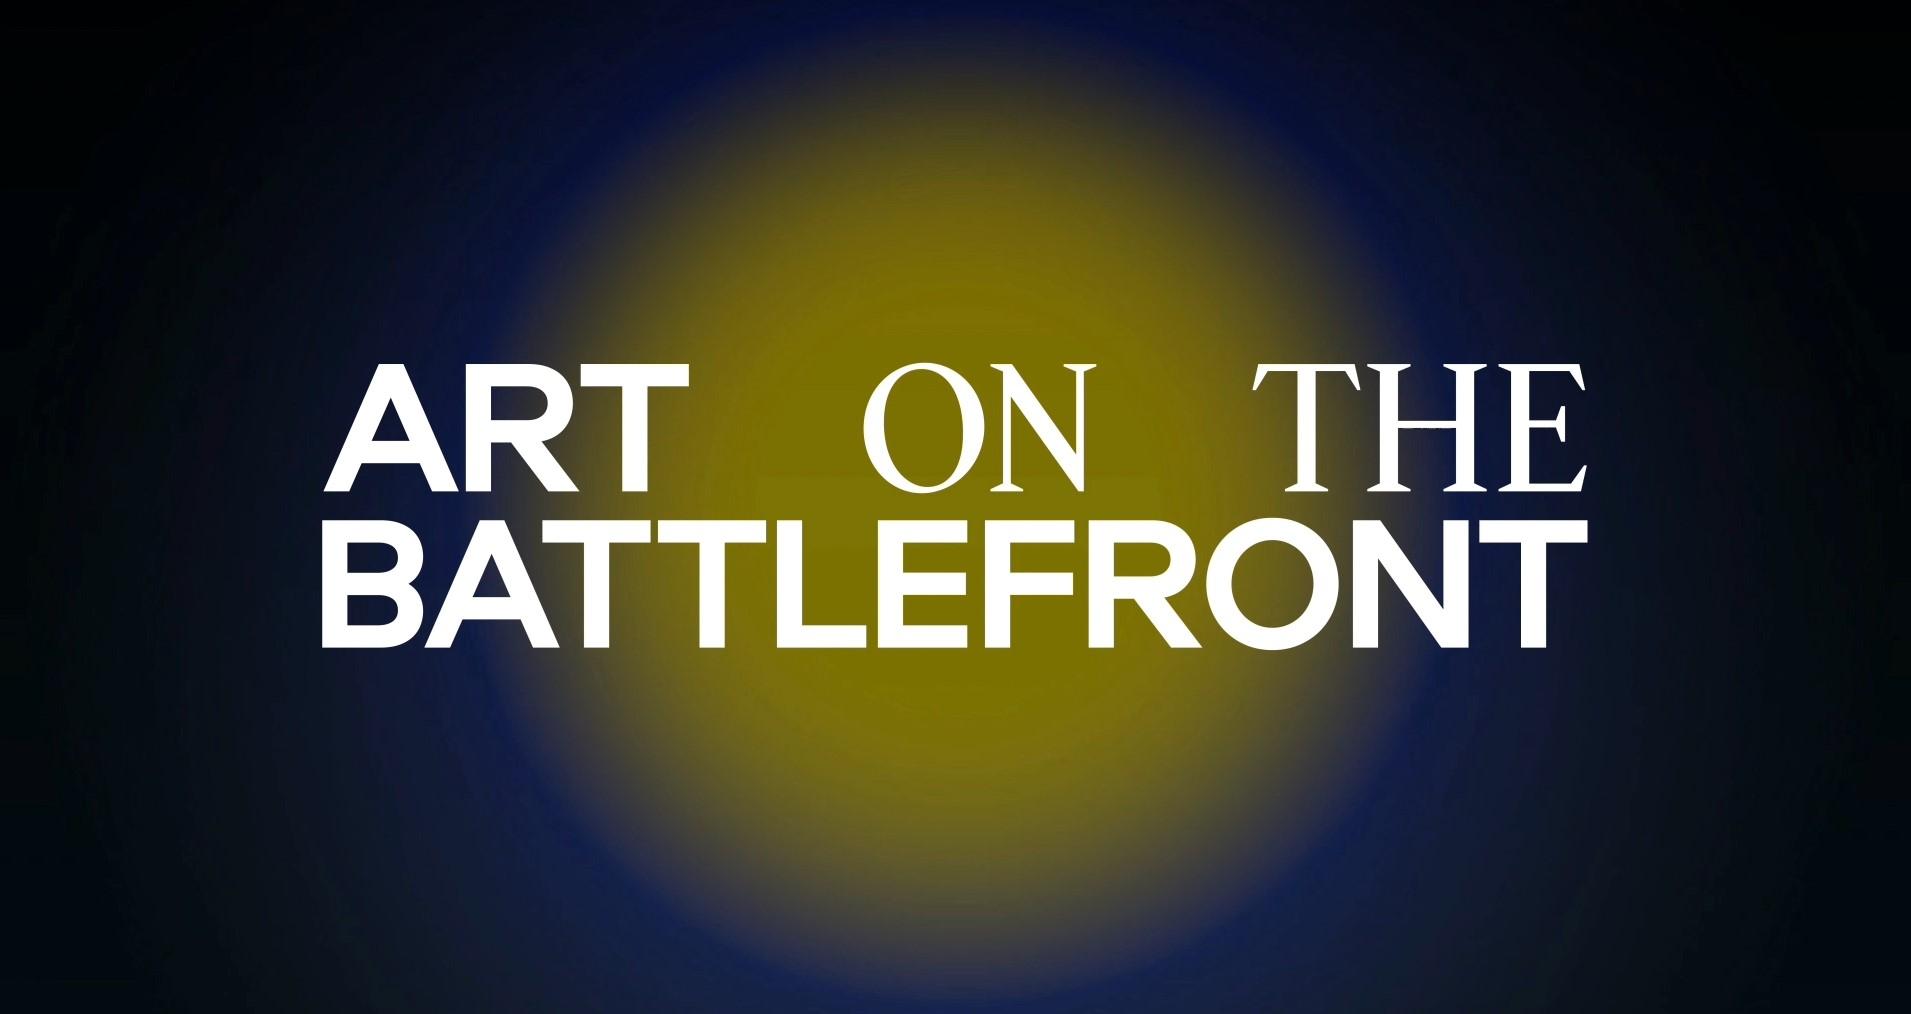 VOGUE UA presents the second part of ART ON THE BATTLEFRONT